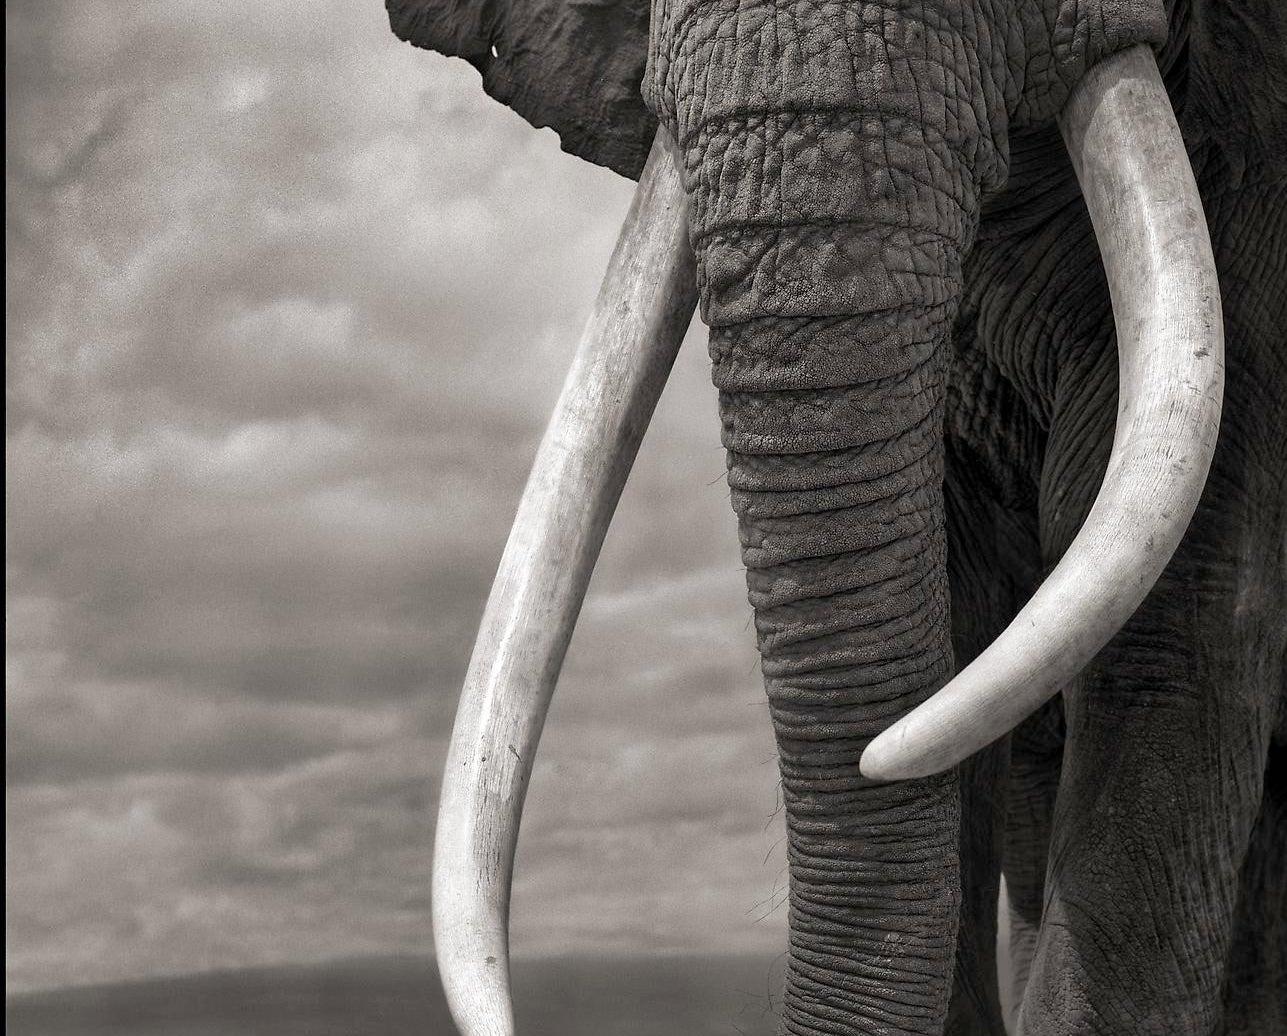 NICK BRANDT (*1966, England)
Elephant on Bare Earth, Amboseli
2011
Archival pigment print
Sheet 177,8 x 142,24 cm (70 x 56 in.)
Edition of 10, plus 2 AP; AP1 (from a sold out edition)

Nick Brandt is a contemporary English photographer. His work